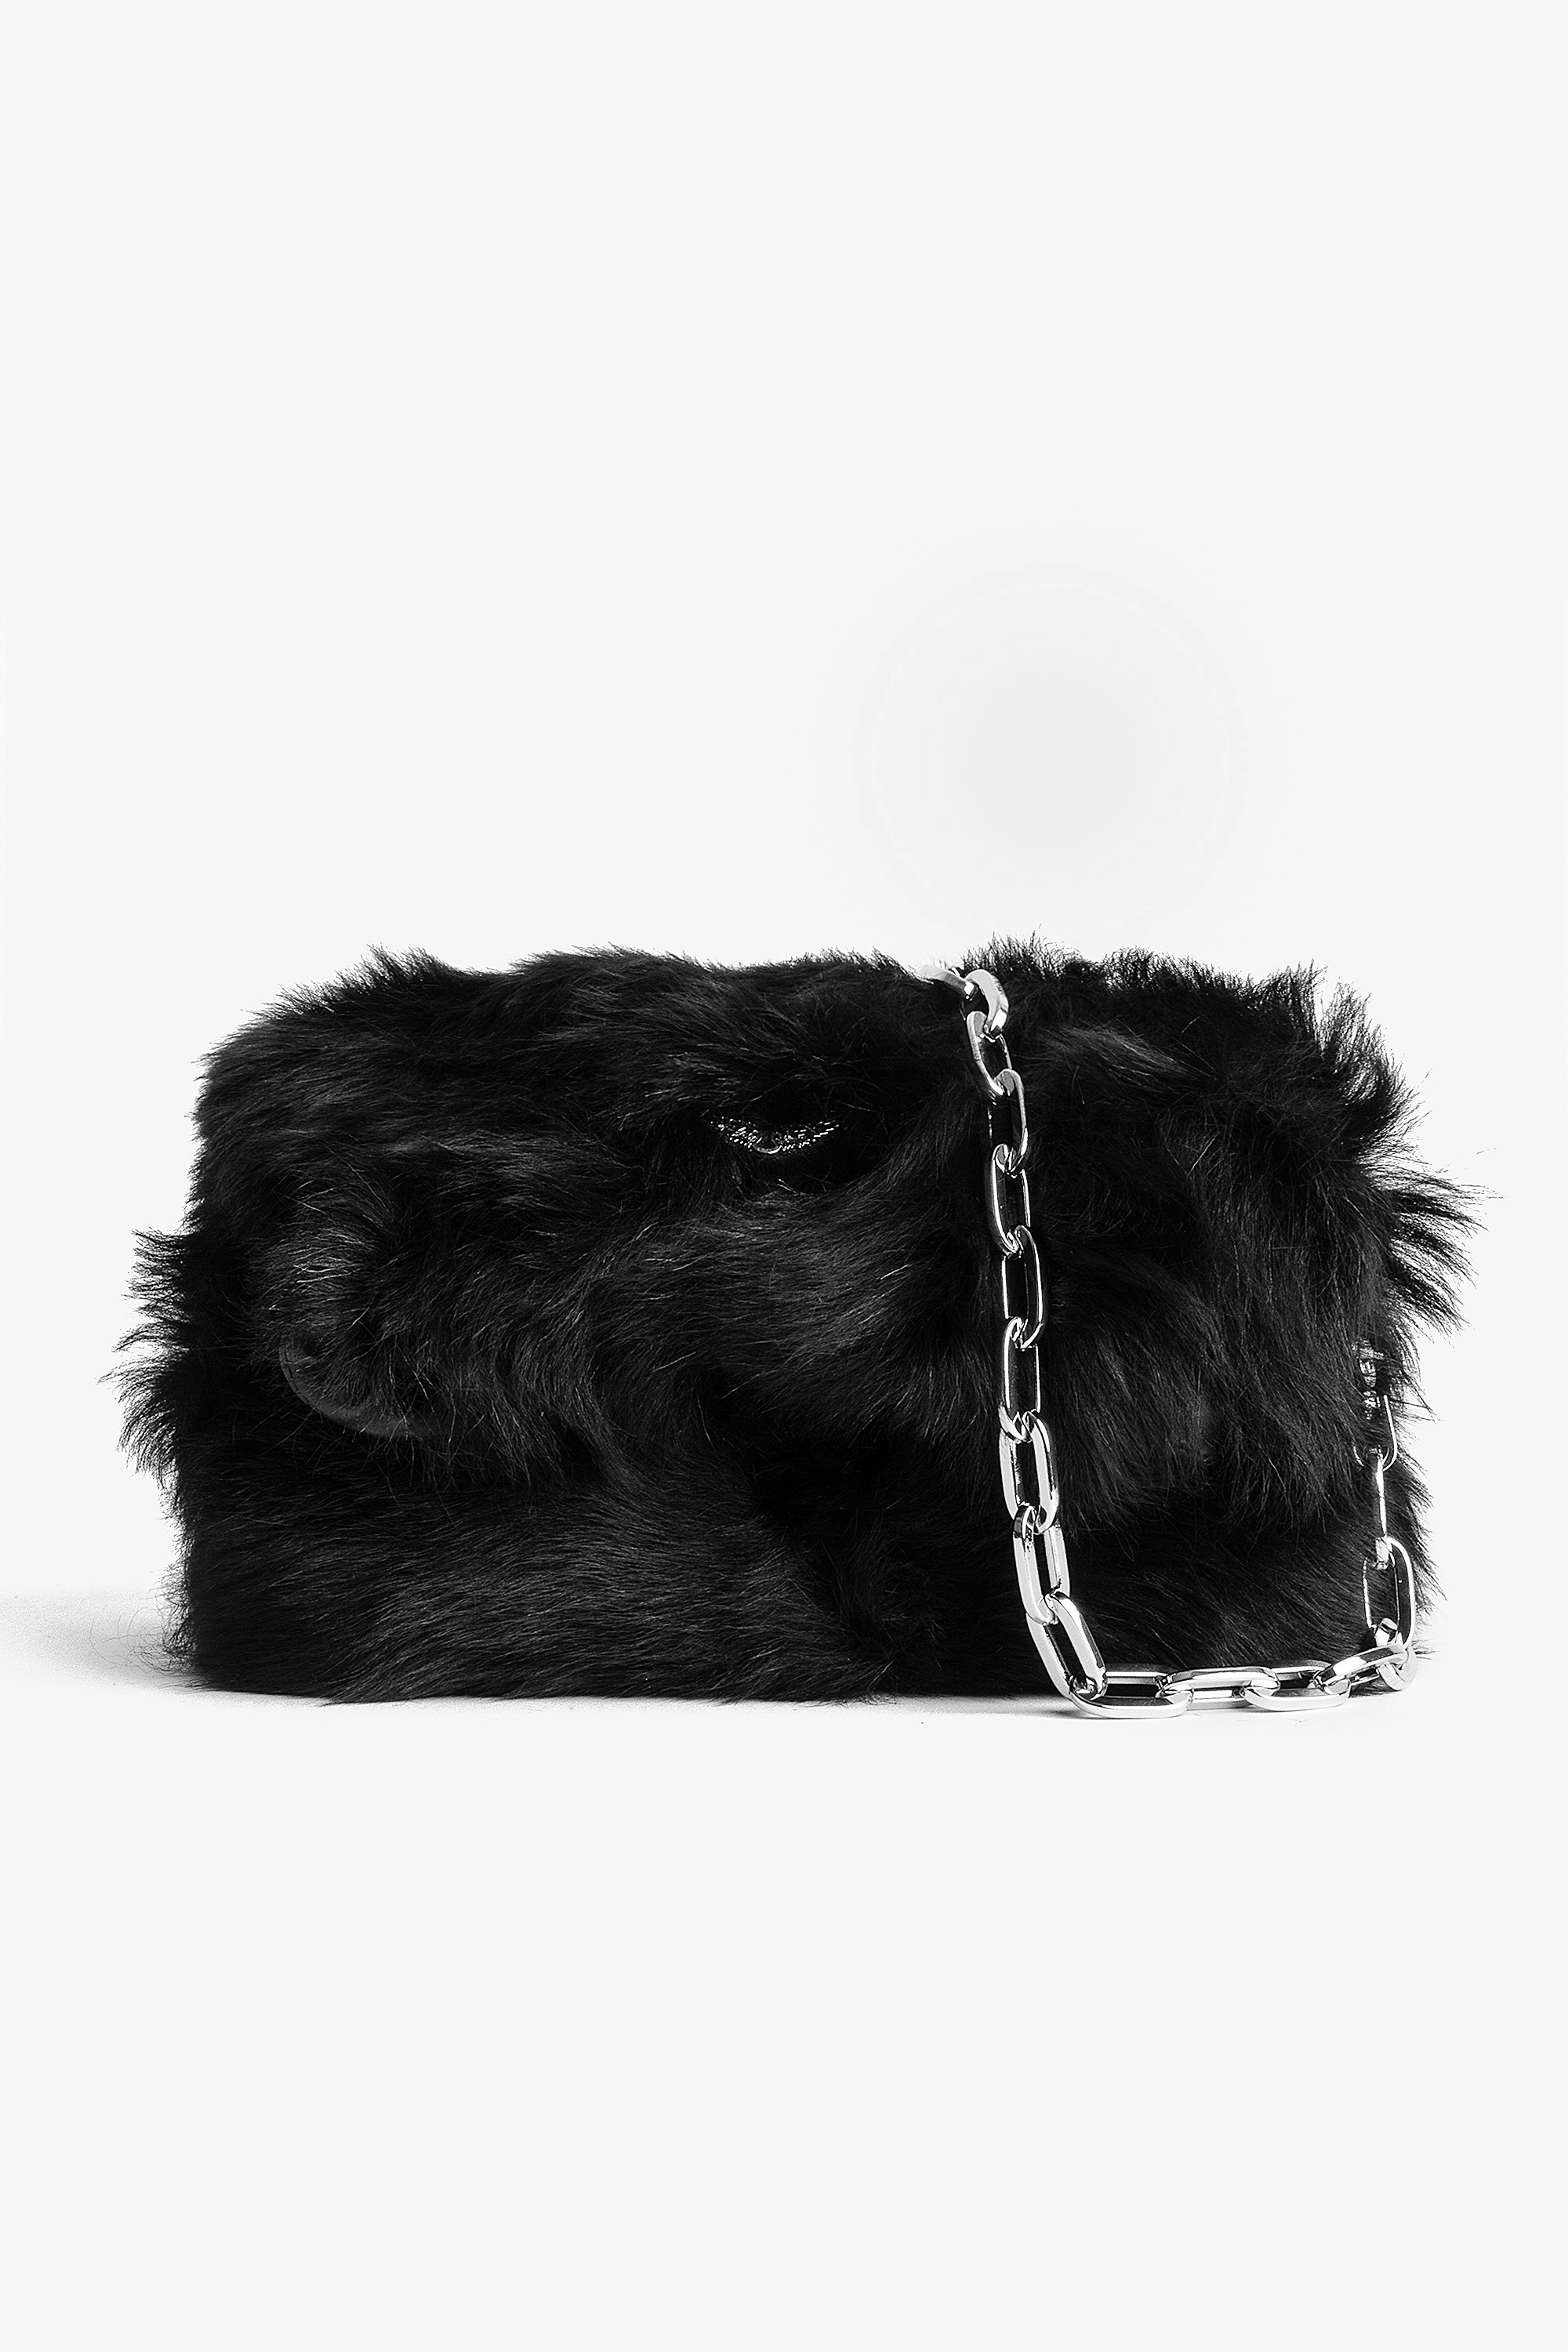 Rockyssime バッグ Women’s clutch in black faux fur with gold-tone and metal chain